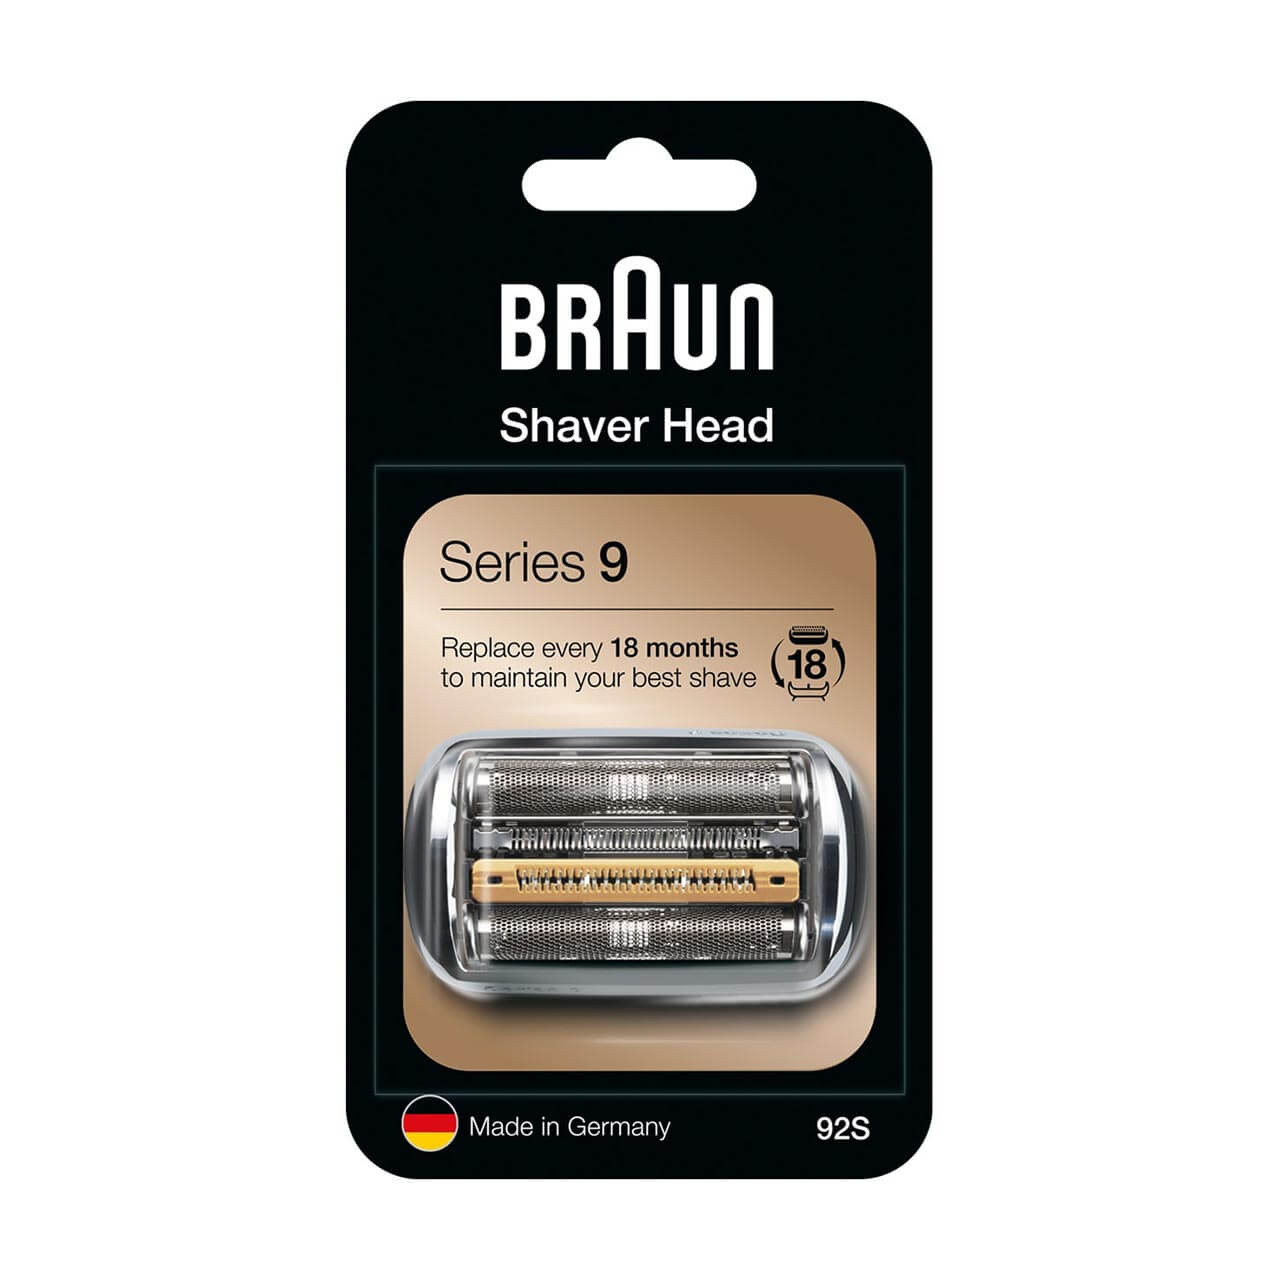 Shaver Replacement Head, Series 9, 92S (Compatible with all Series